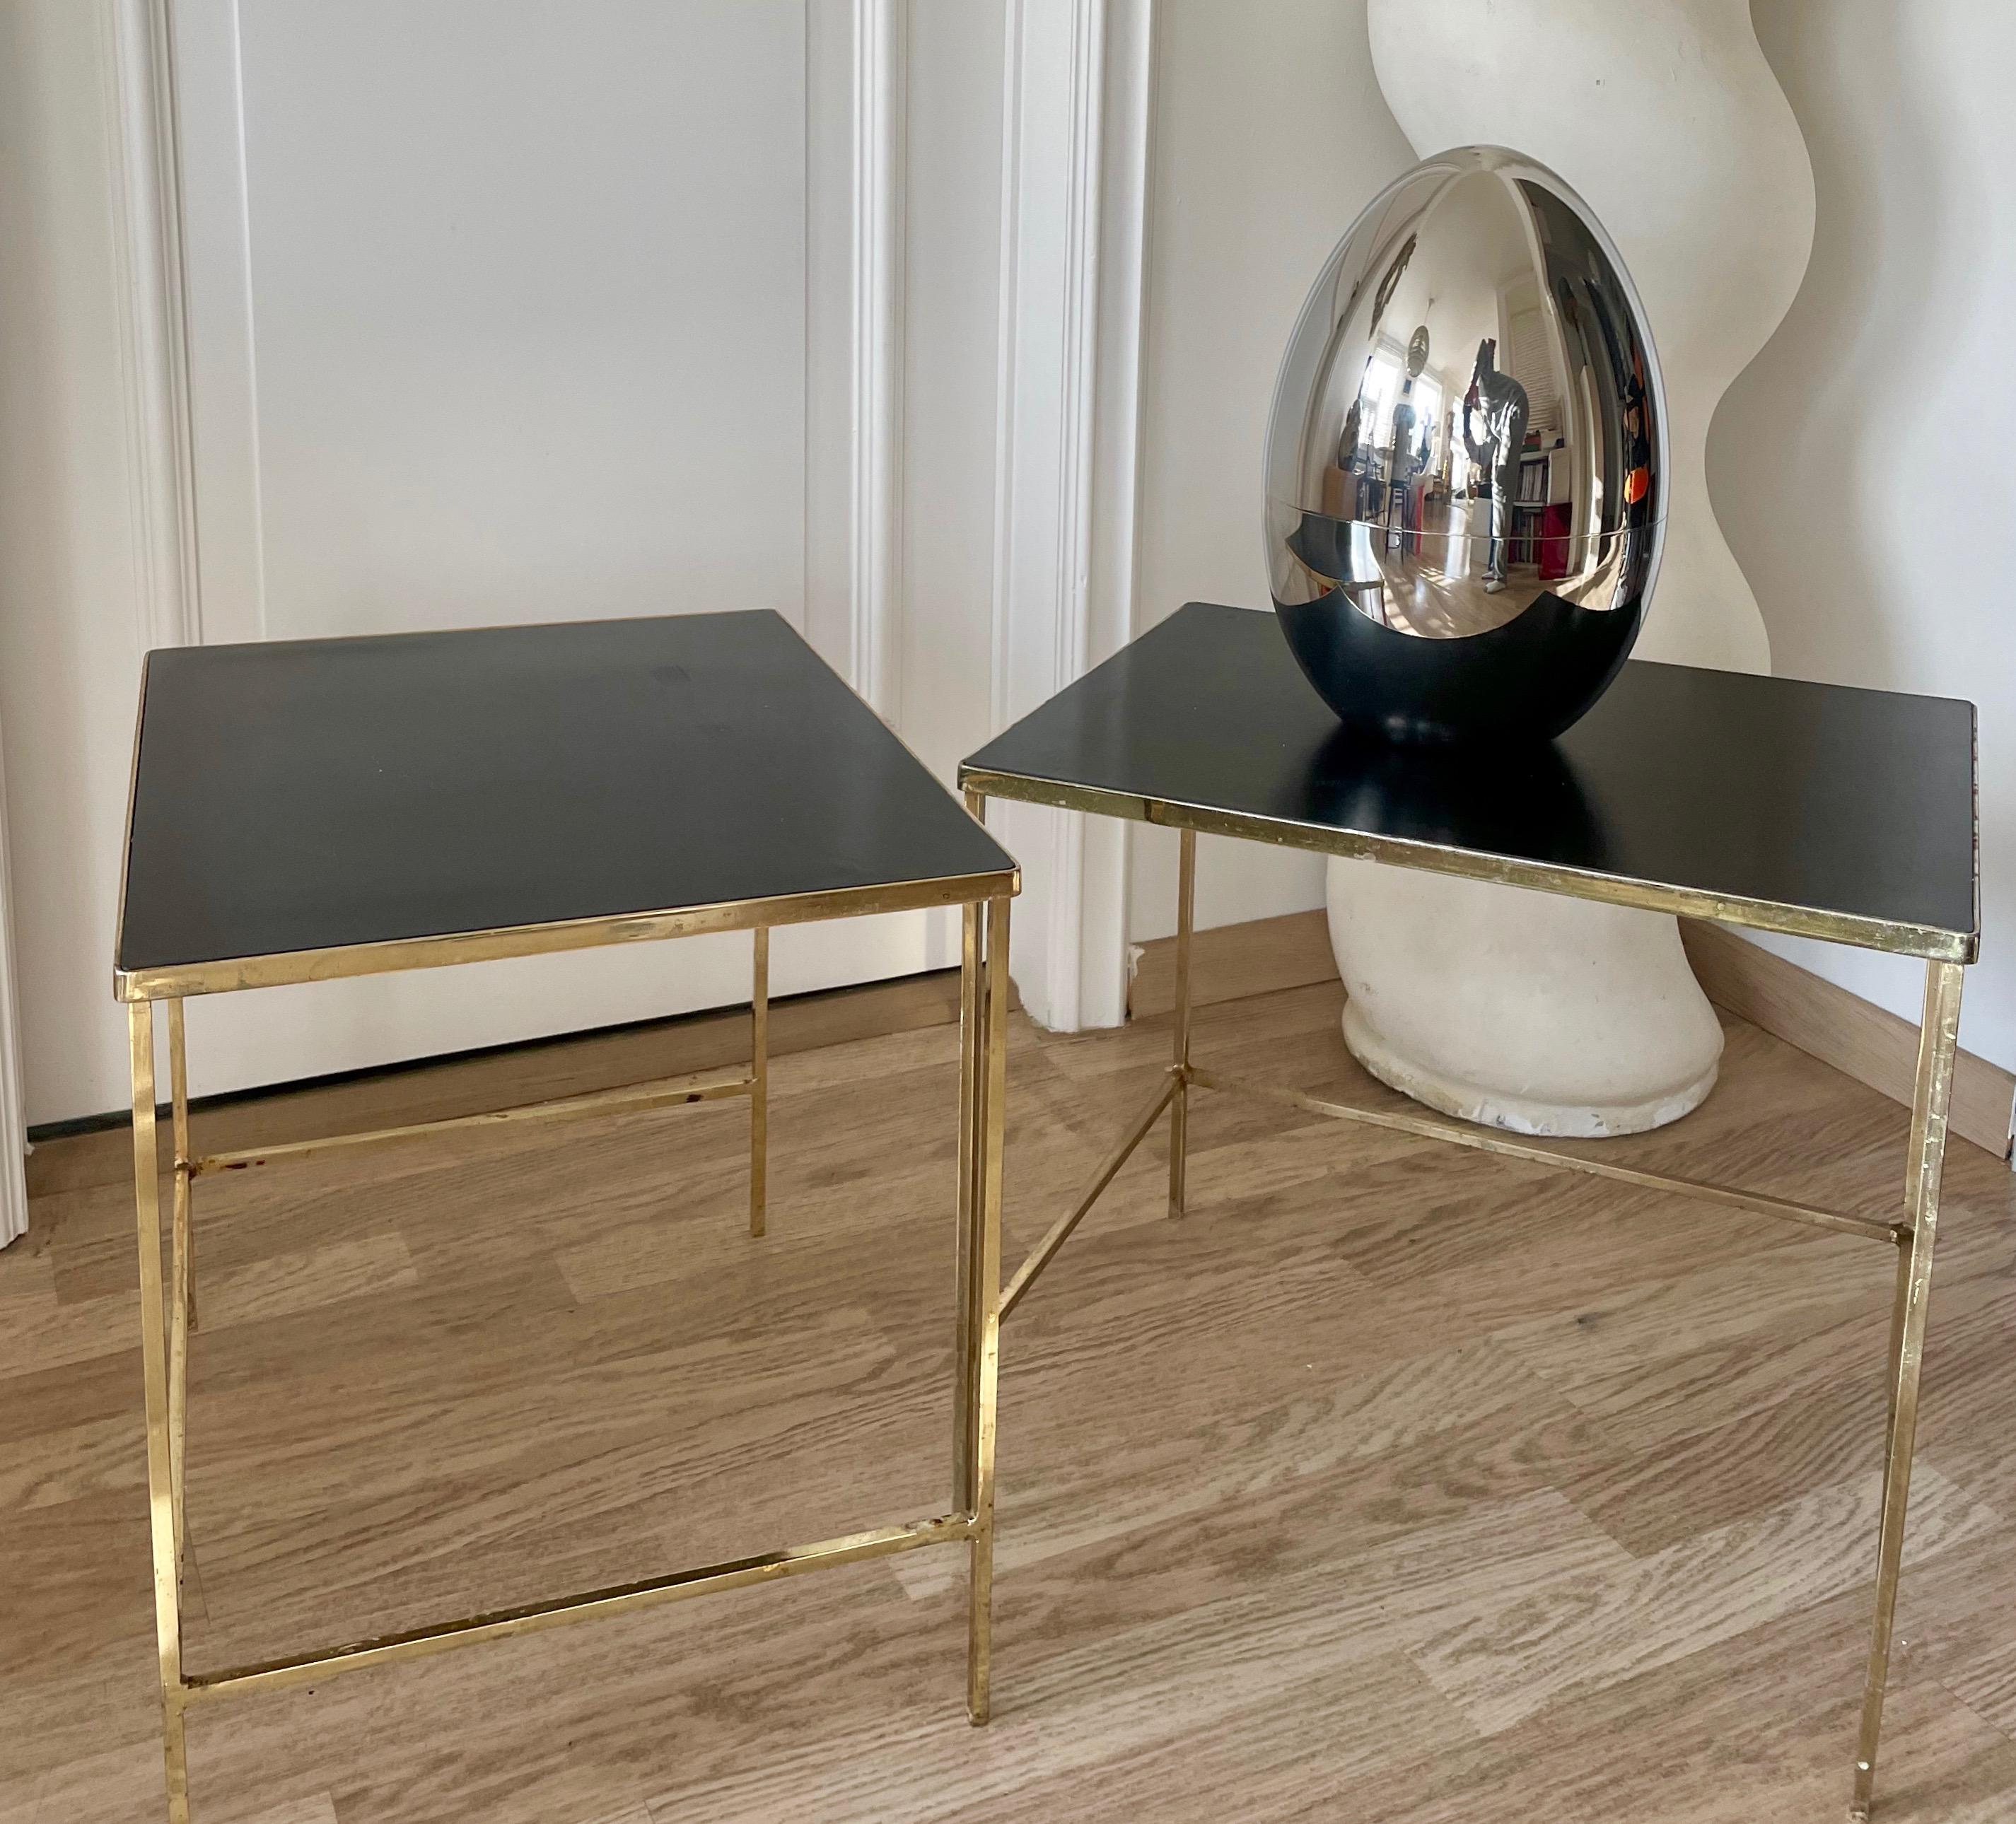 Pair of gilt metal minimalist side tables with a black formica top.
France, 1970.